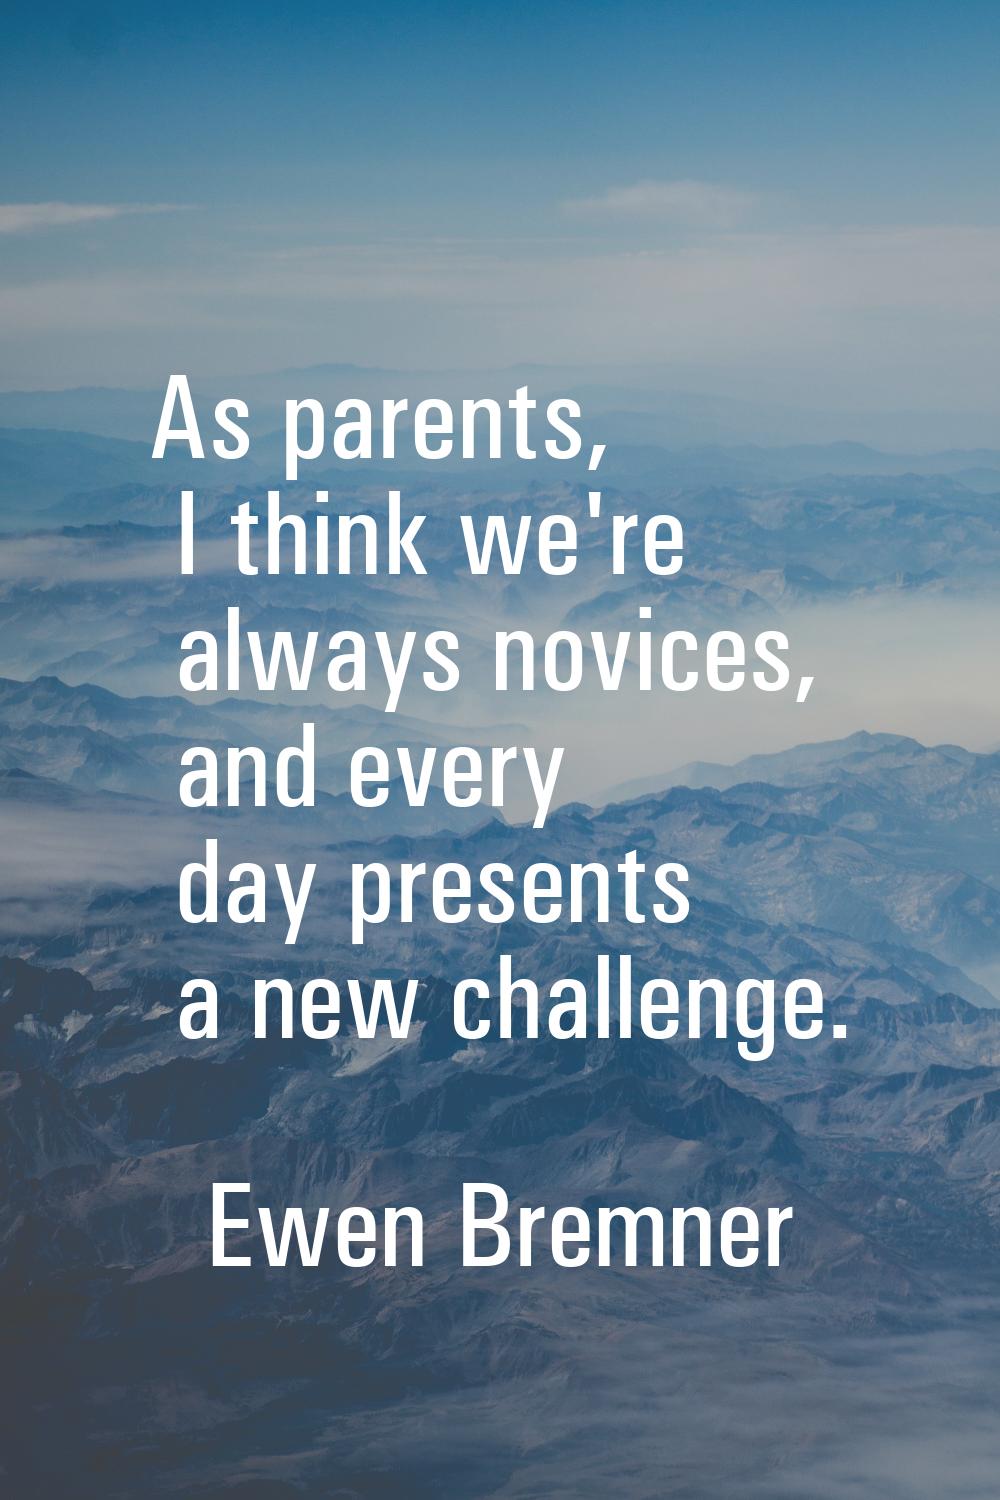 As parents, I think we're always novices, and every day presents a new challenge.